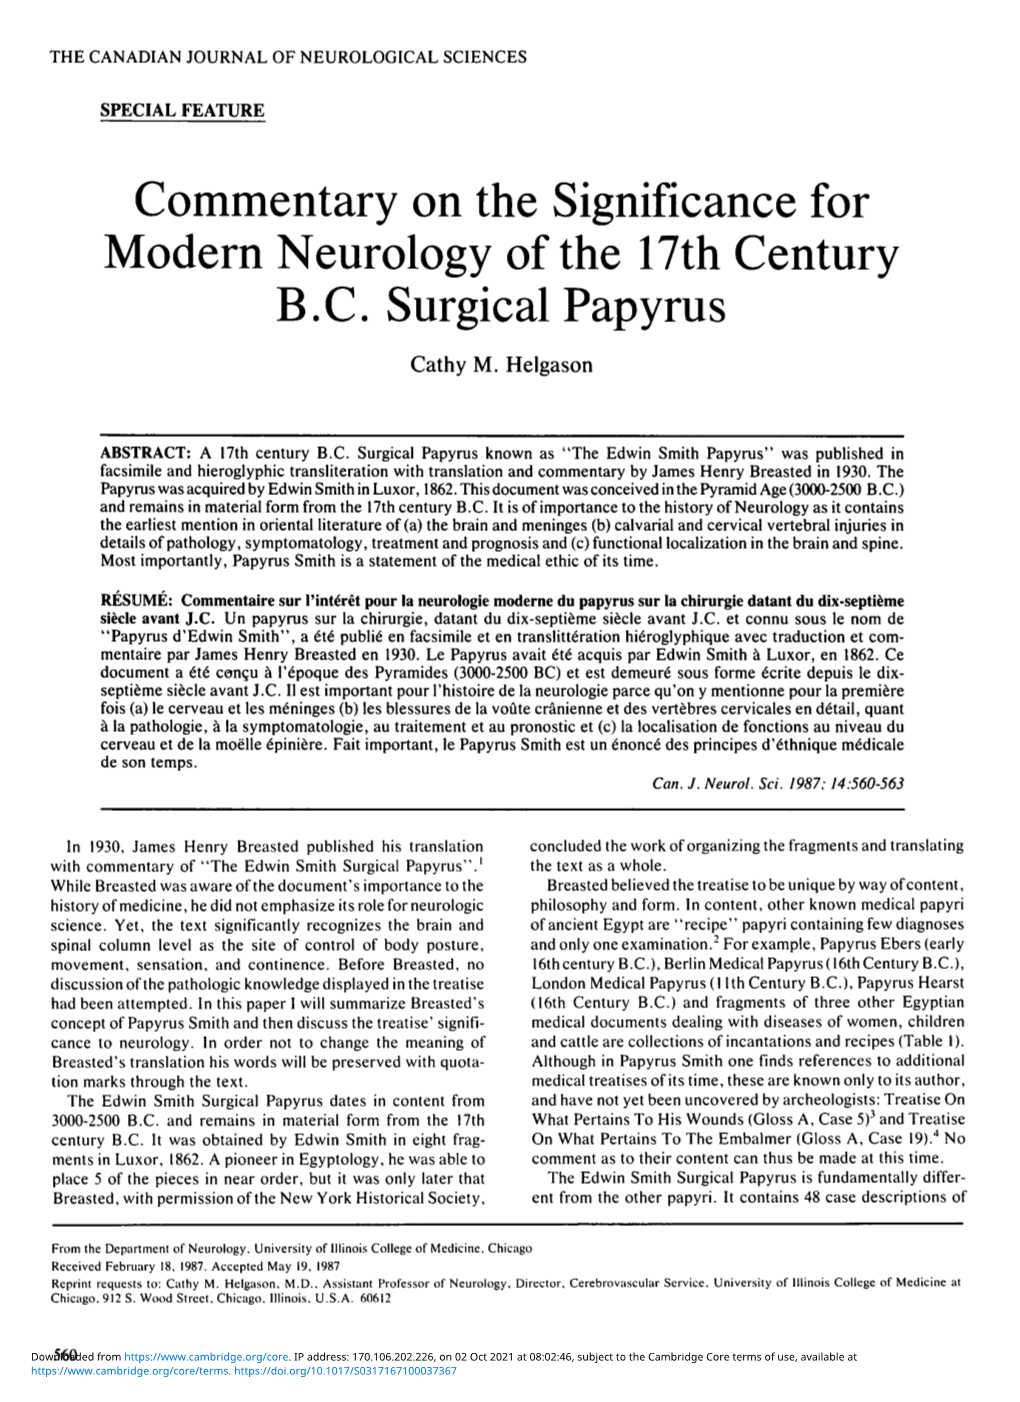 Commentary on the Significance for Modern Neurology of the 17Th Century B.C